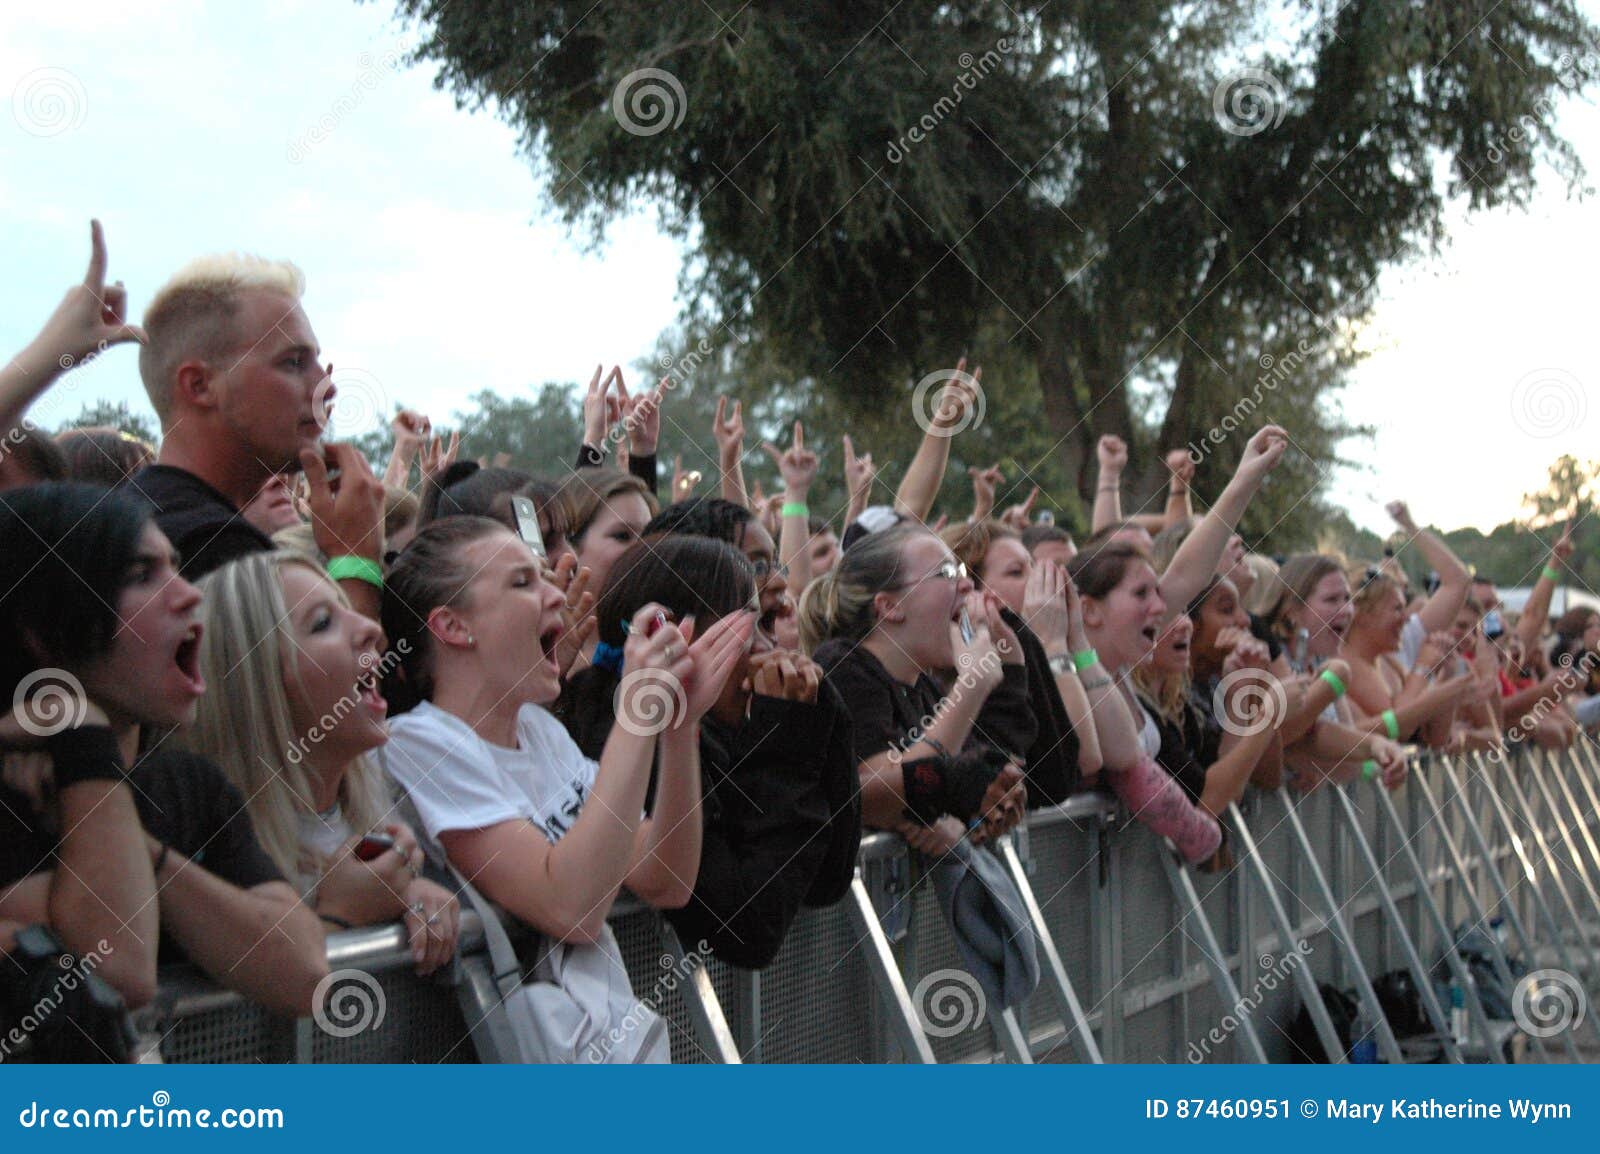 Concert Crowd Cheering Behind Barrier Editorial Photo Image Of Stand